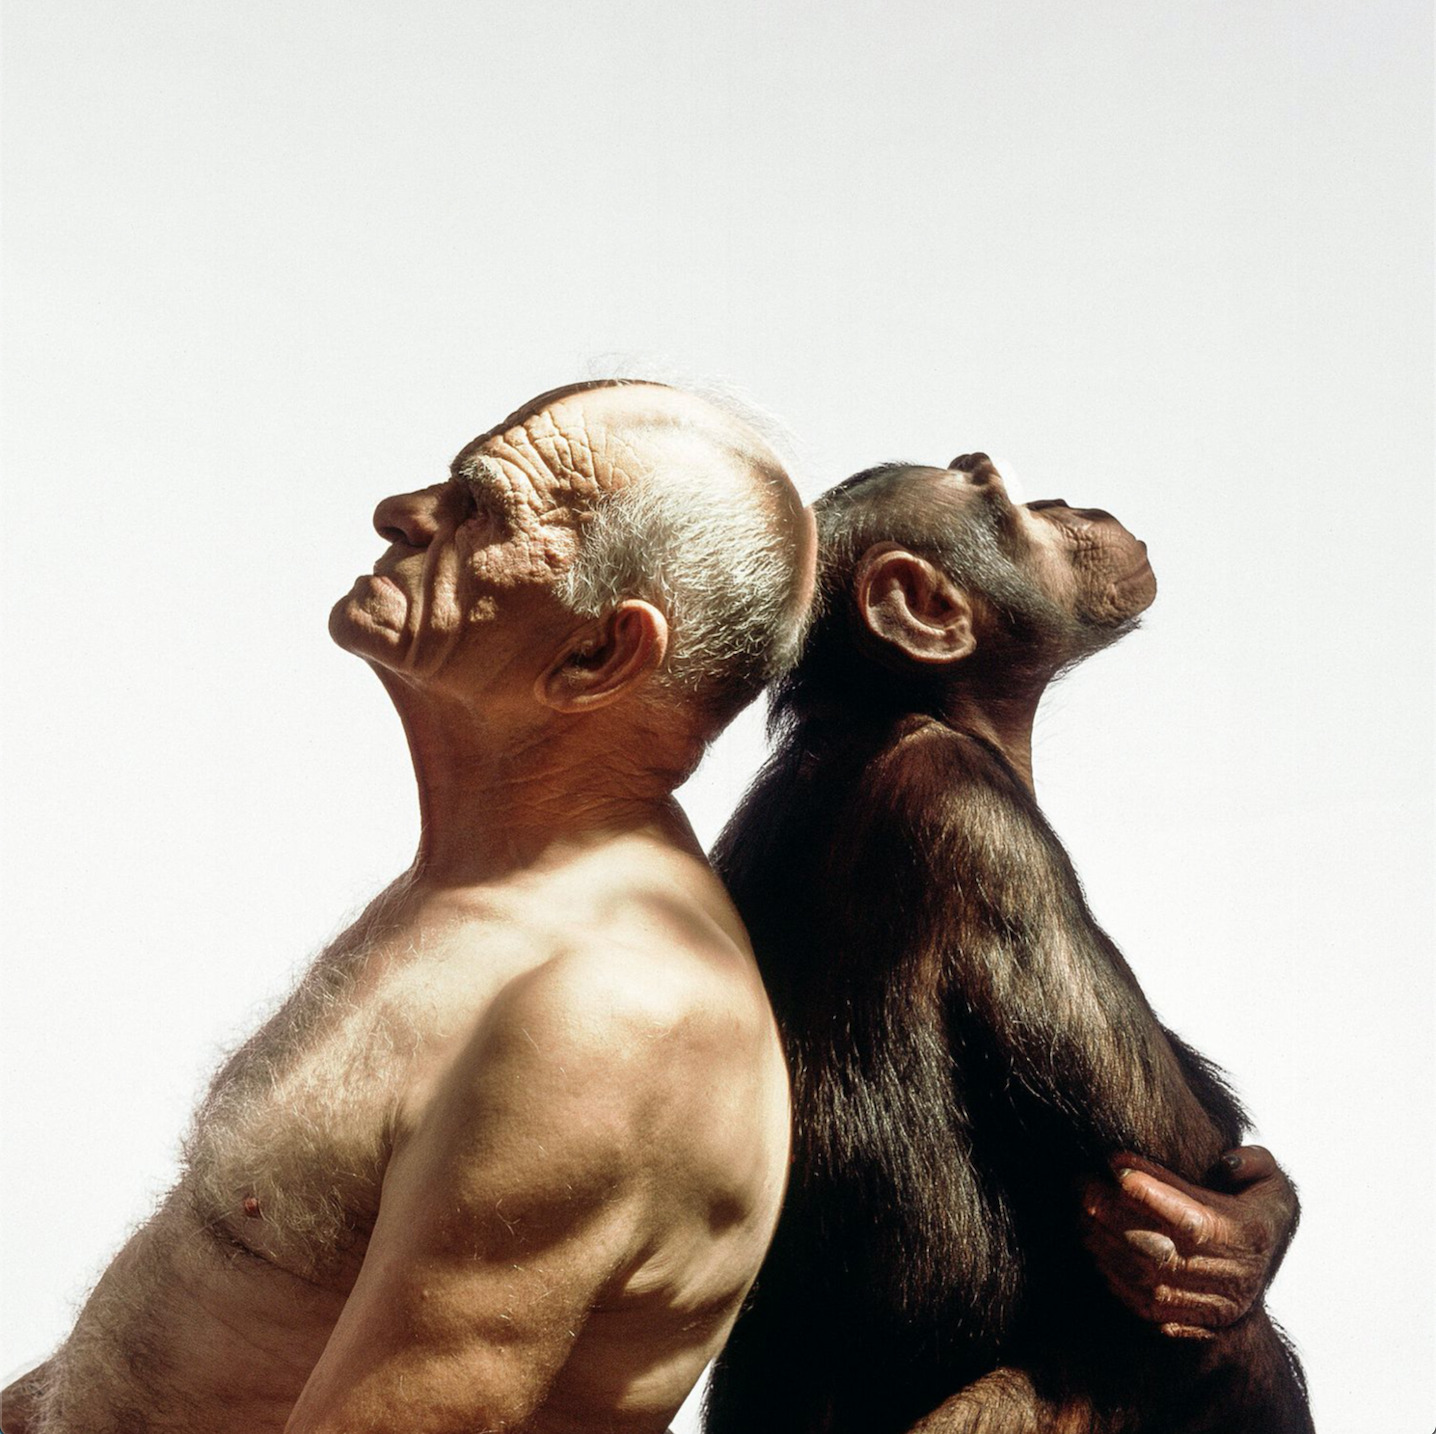 VT2-©James-Balog-The-Old-Man-and-The-Ape-1993-2